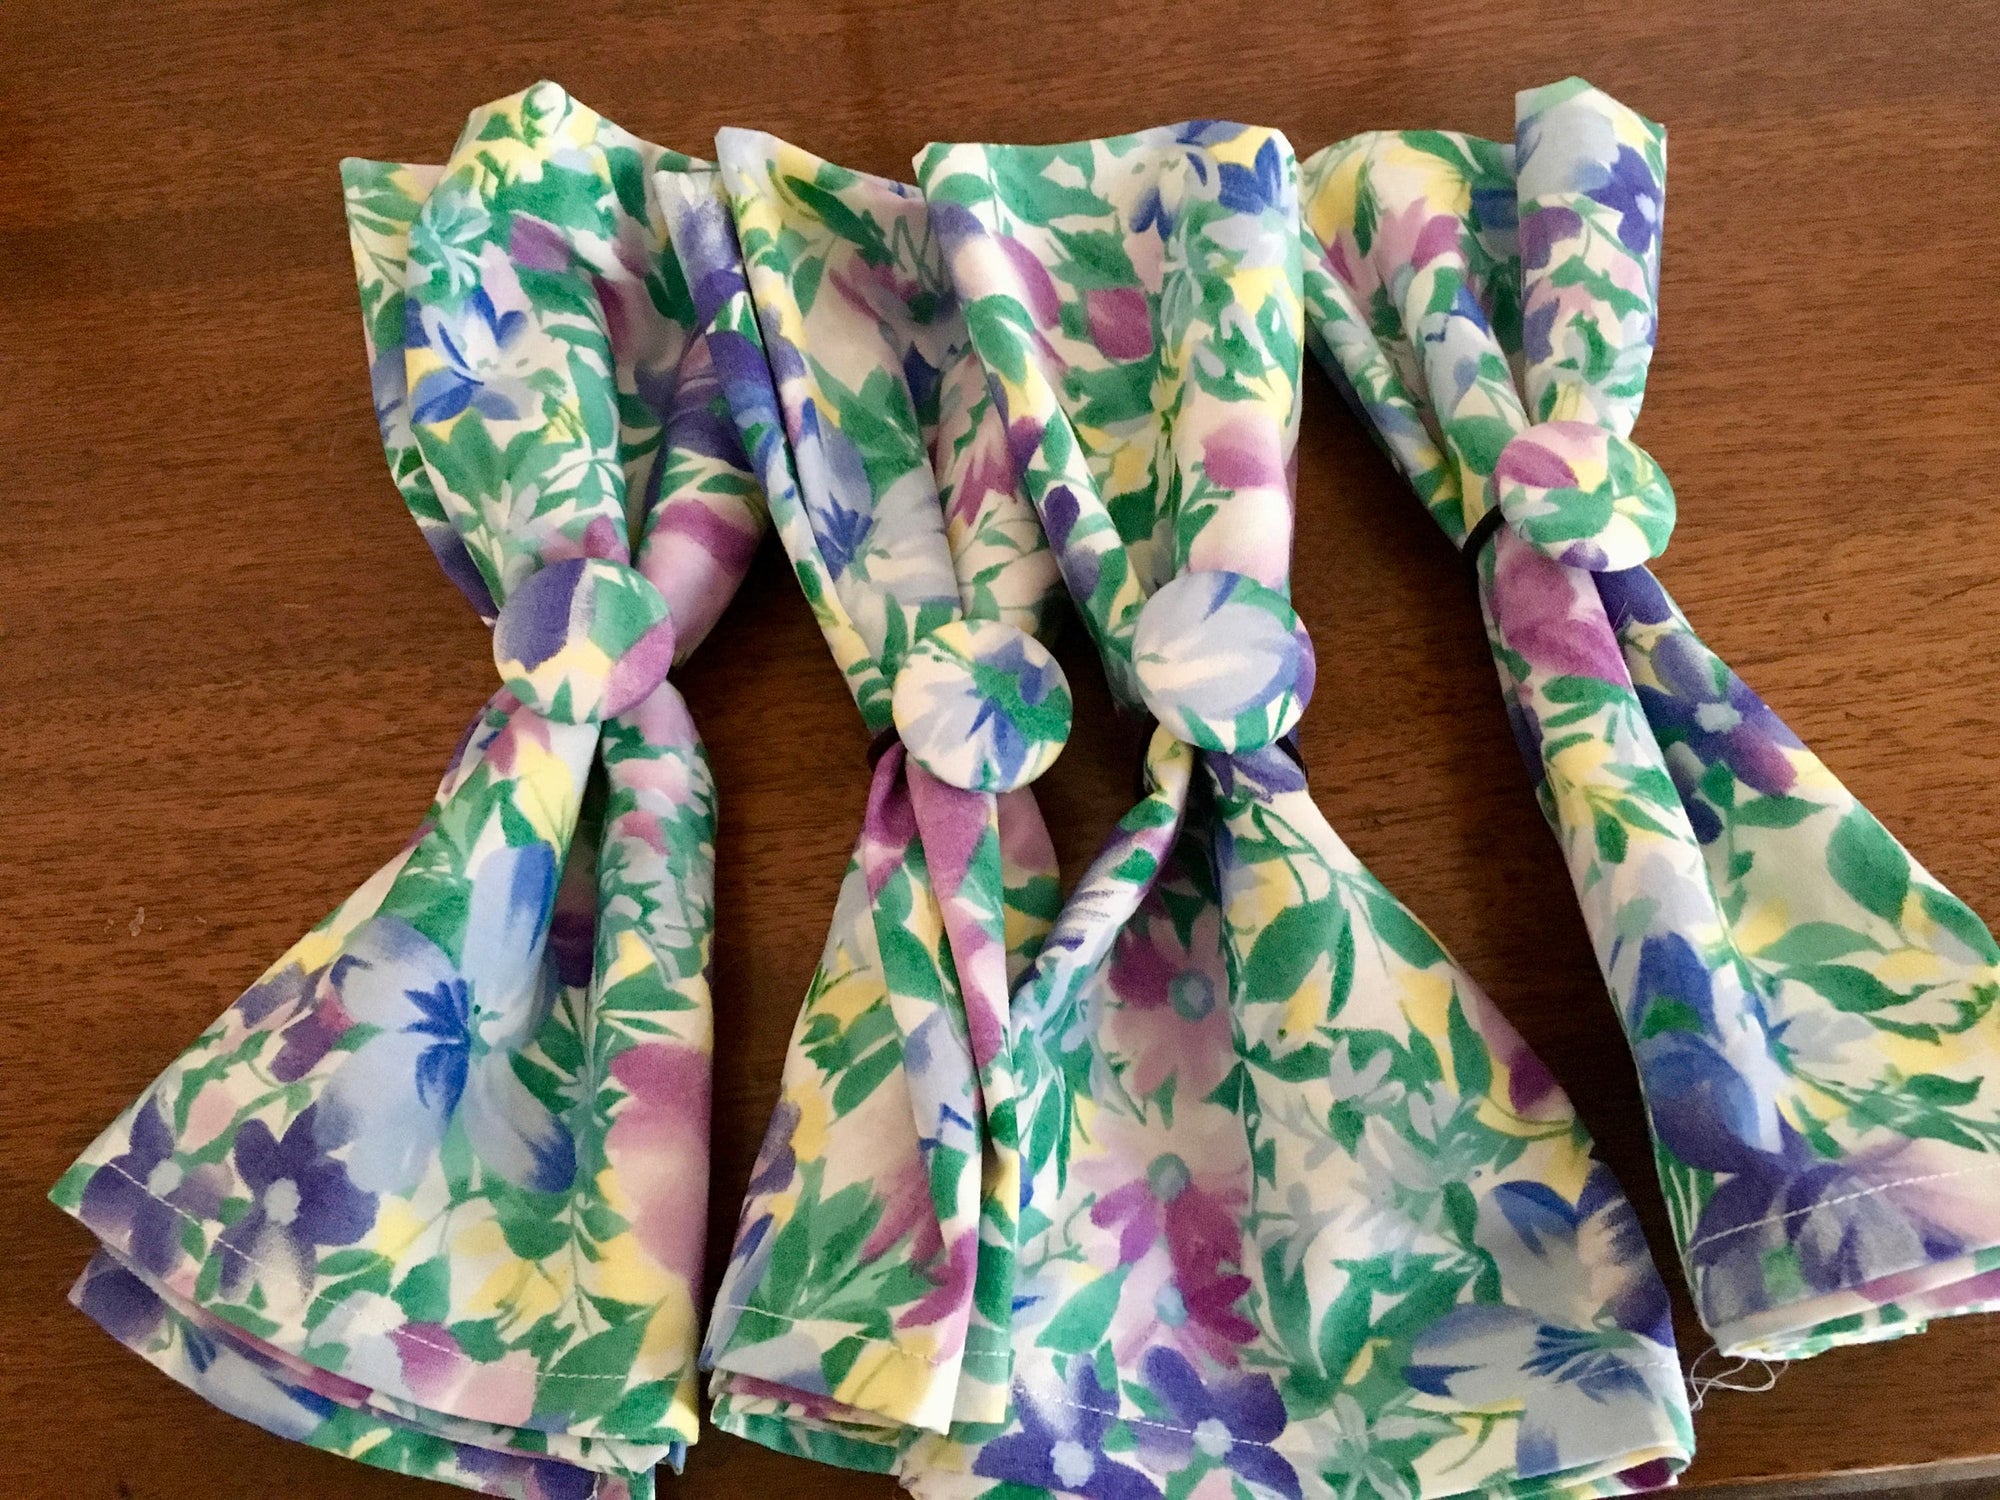 Floral print cloth napkins with matching napkin rings